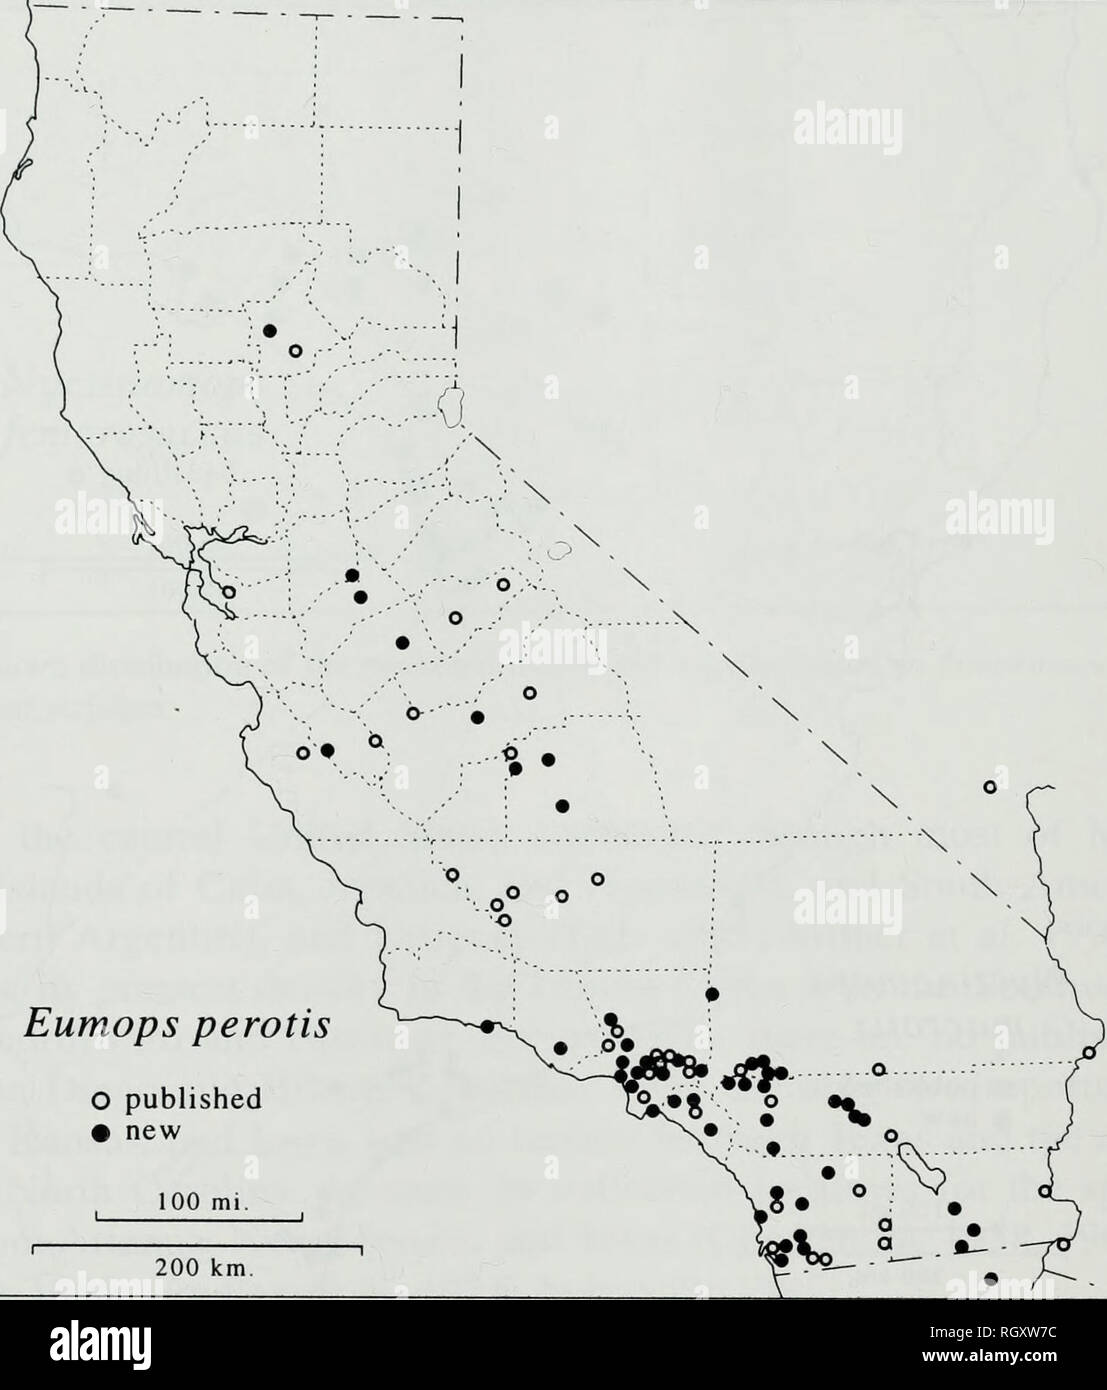 . Bulletin. Science. 62 SOUTHERN CALIFORNIA ACADEMY OF SCIENCES. Eumops perotis O published • new Fig. 8. Known distribution of the western mastiff bat, Eumops perotis californicus, in California and adjacent border areas. ported heretofore from the Imperial Valley, Imperial Co., the Coachella Valley north of Mecca, Riverside Co. (Grinnell 1918), from elsewhere in Riverside Co. except 4 mi SW of Lakeview (Vaughan 1959), from San Bernardino Co. except Colton (Grinnell 1918; Howell 1920a) and Keys Ranch (Campbell 1931), which apparently was a sight record. Counties represented herein from which  Stock Photo